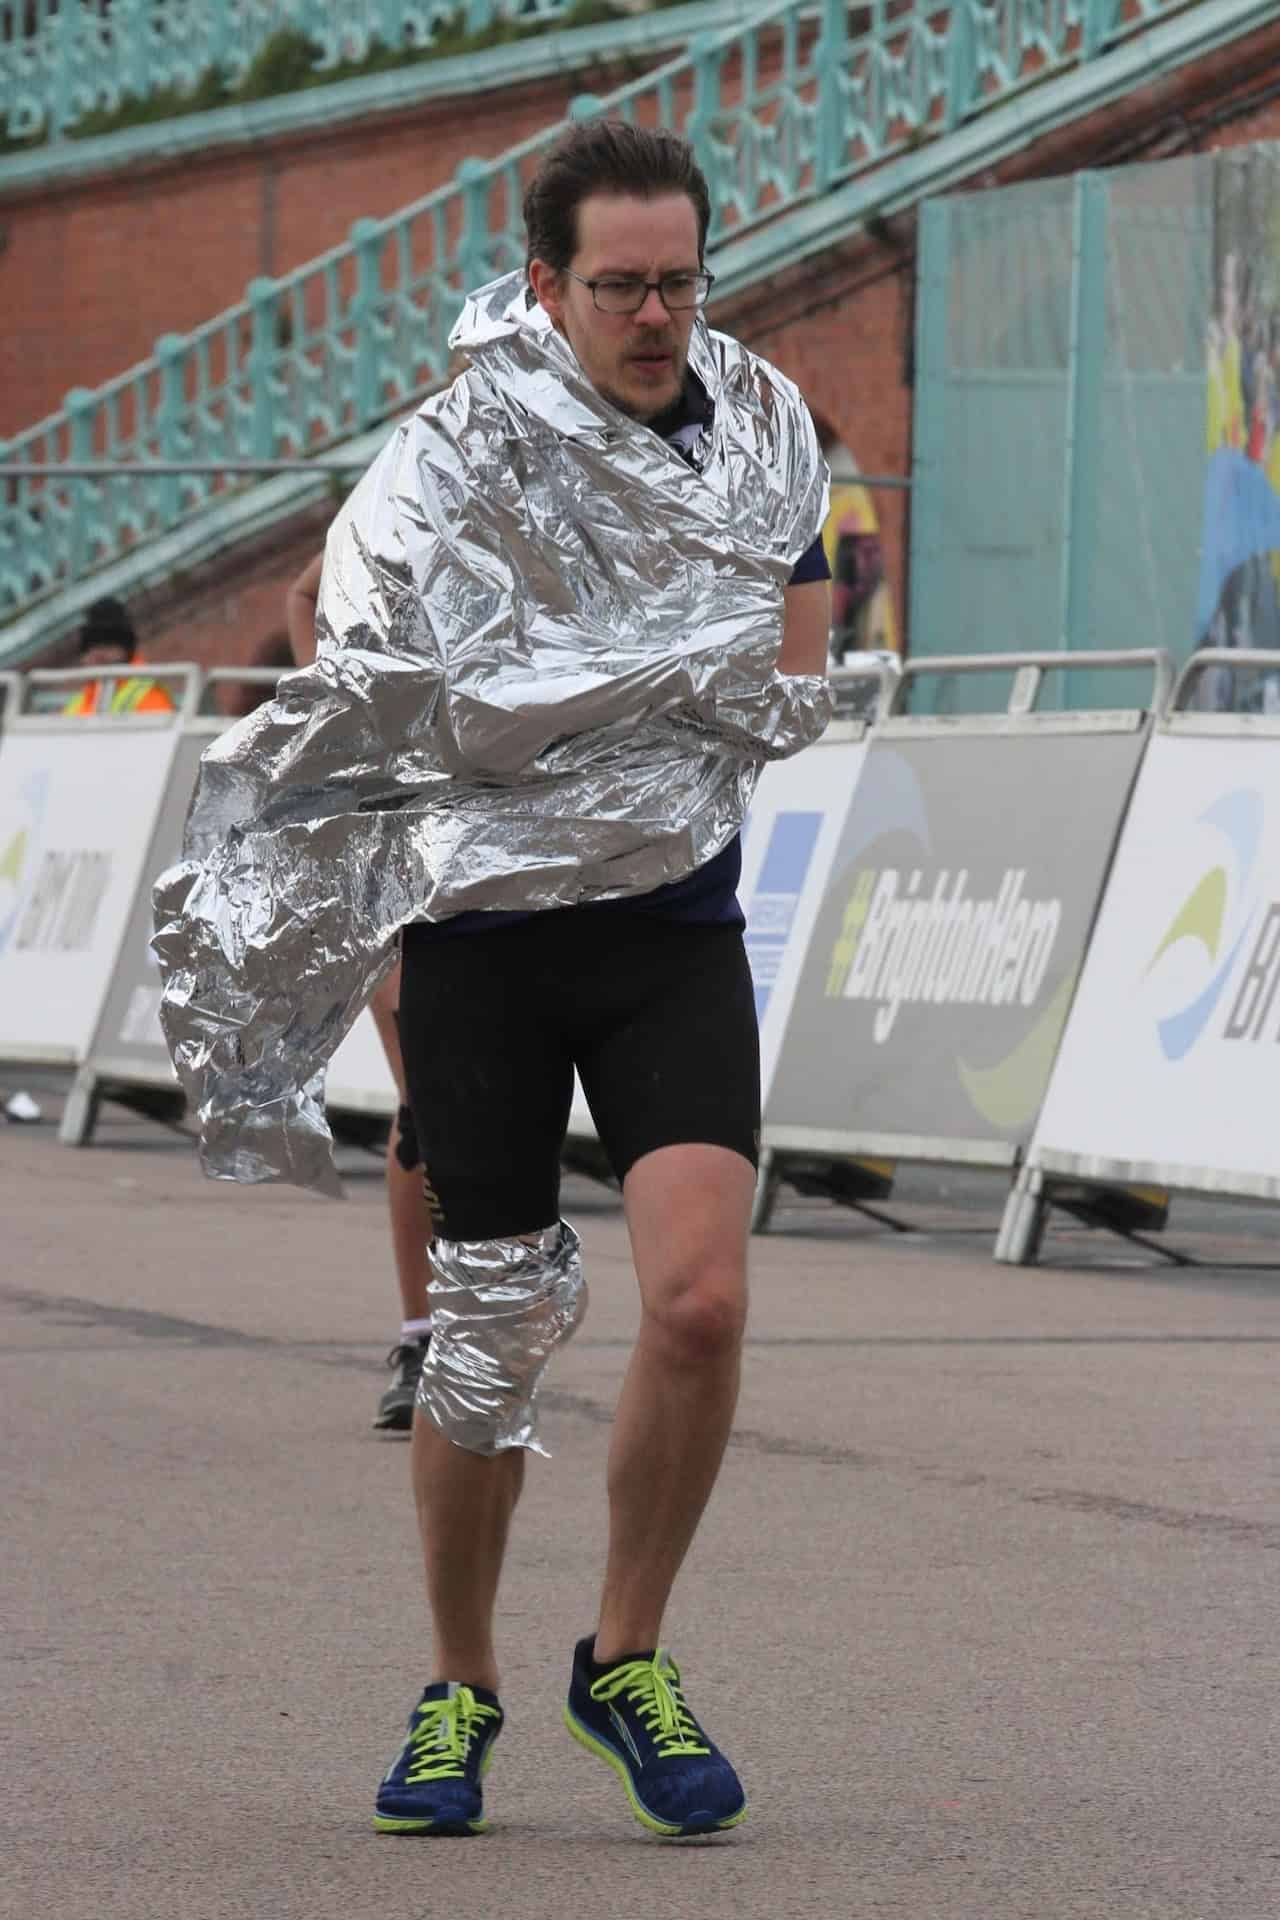 Carlos Eriksson wrapped in a silver blanket, pushing himself to finish the marathon.